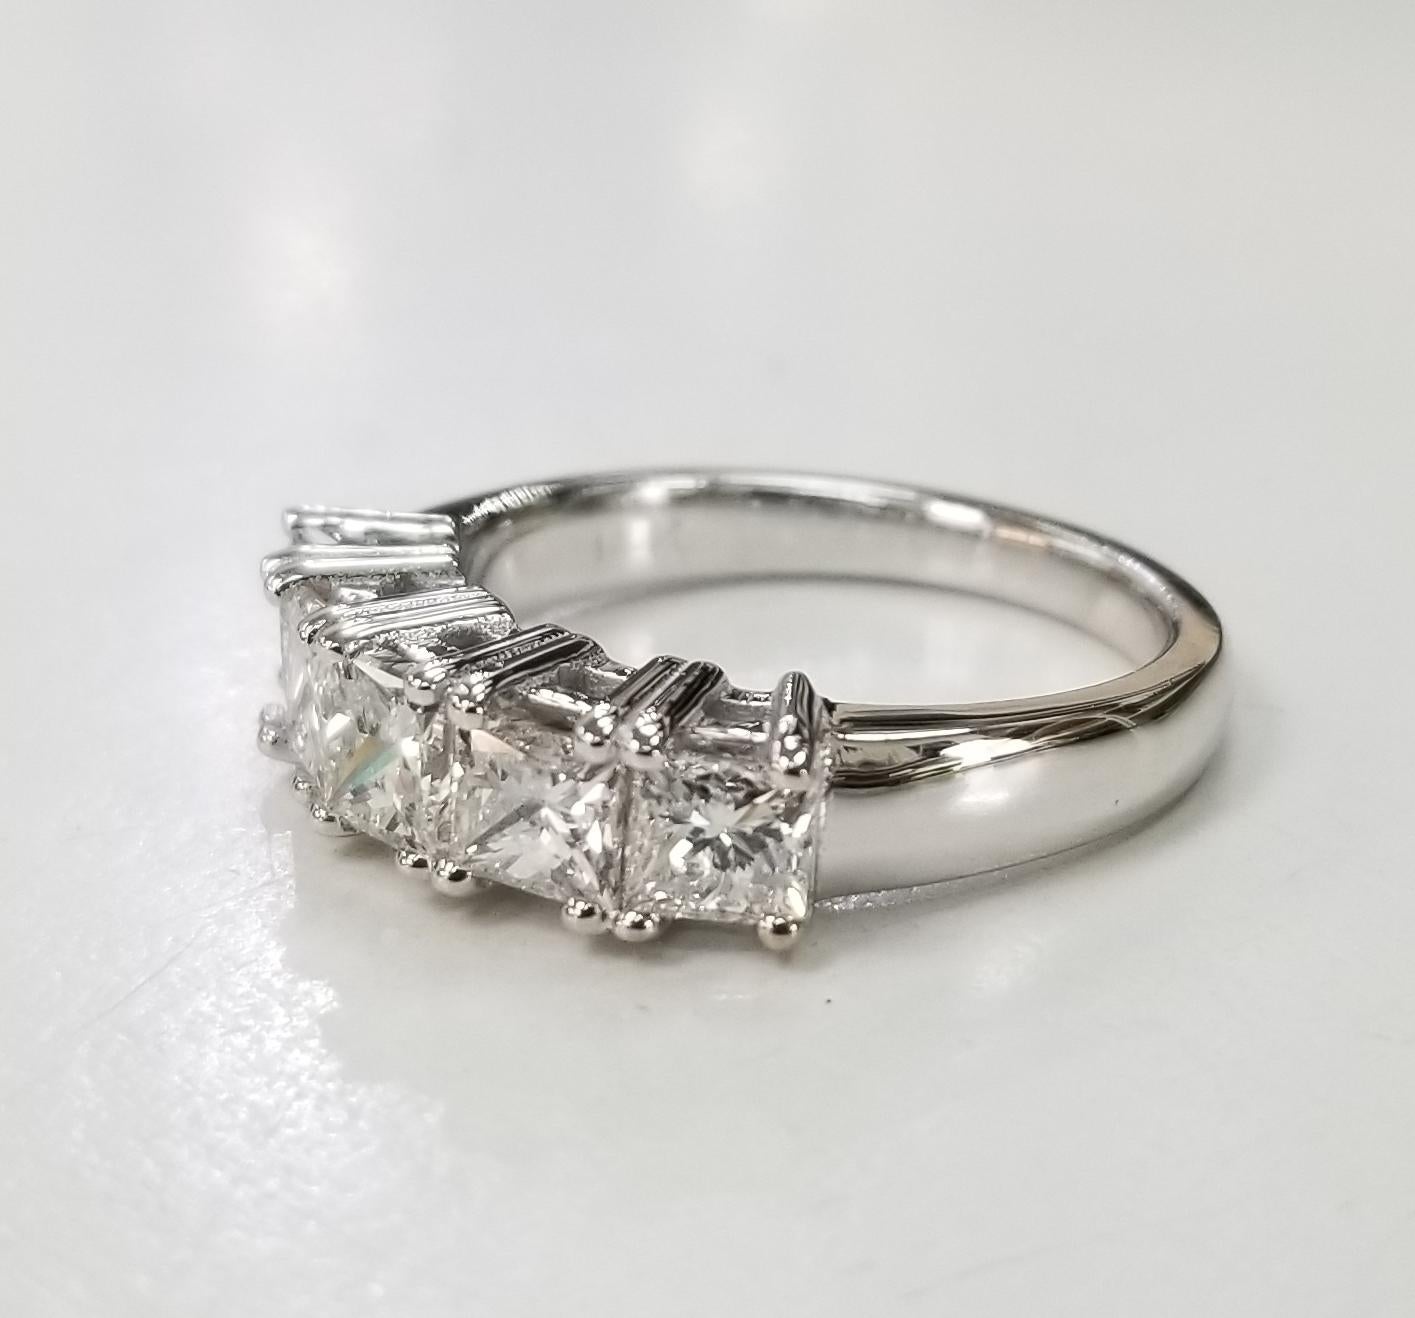 14k white gold 5 princess cut diamonds anniversary wedding ring, containing 5 princess cut diamonds; color F-G, clarity VS2-SI1 and  weight 2.00 cts. (average size diamonds.40pts.) ring size is 6.75 and can be sized to fit for free.